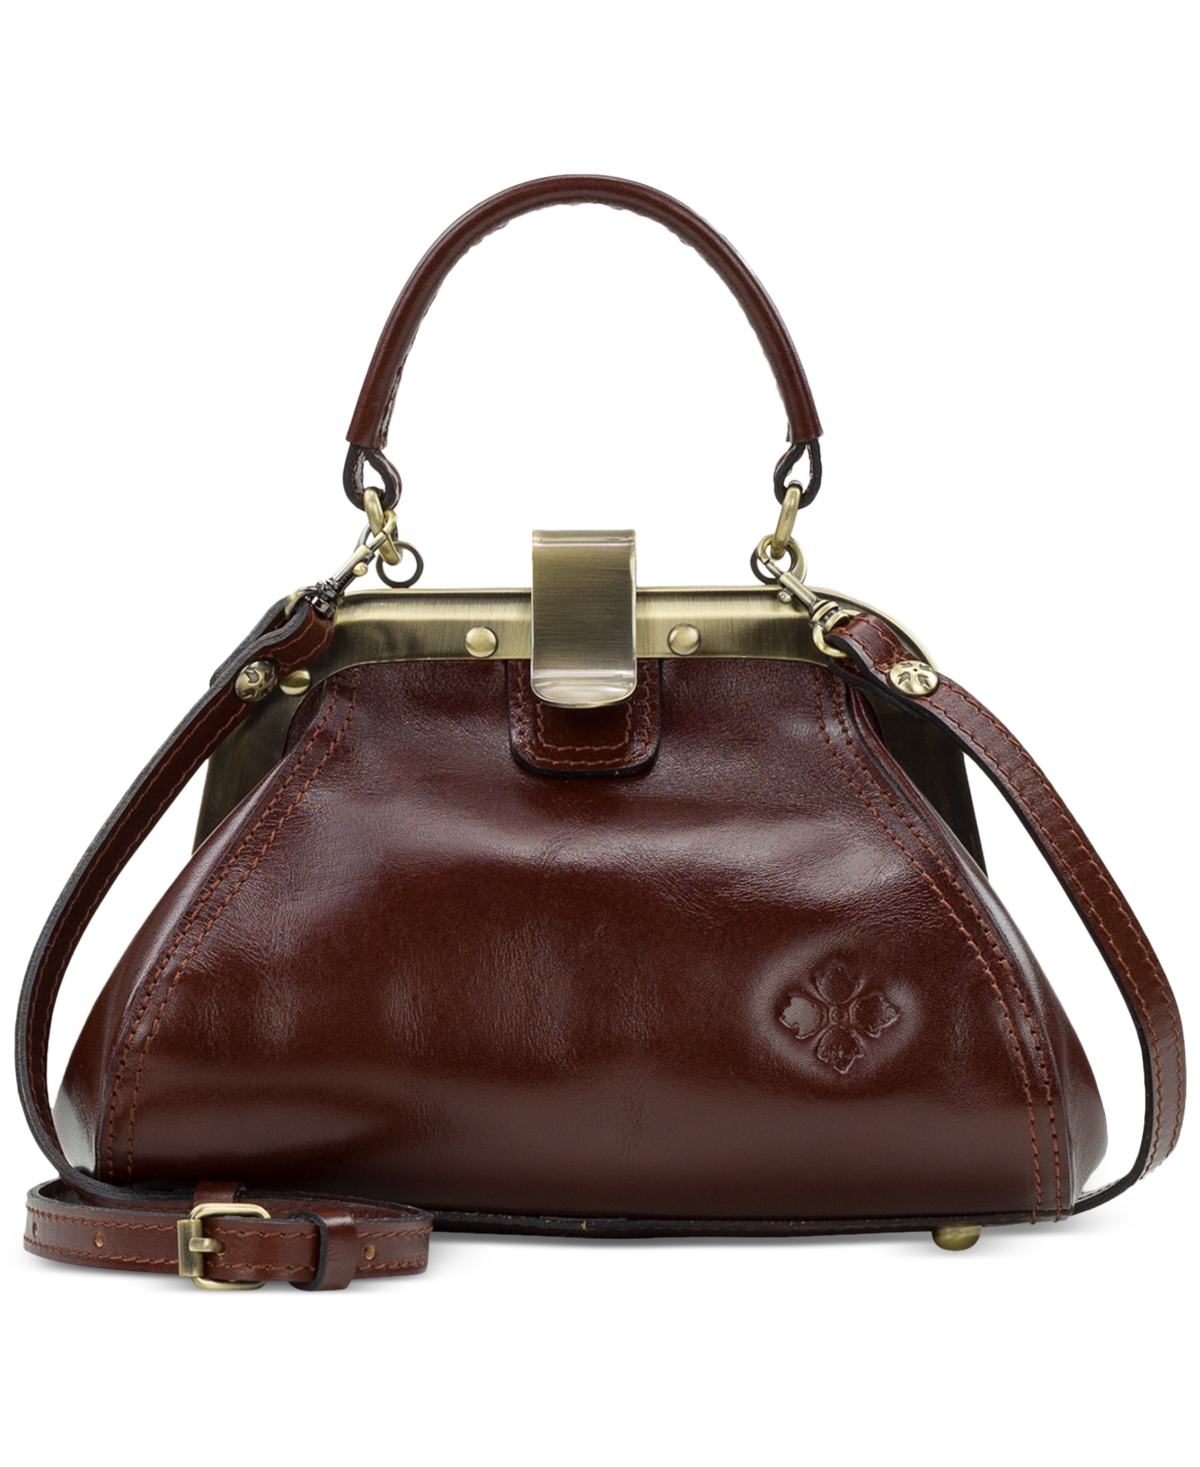 Patricia Nash Conselice Small Leather Frame Satchel In British Tan